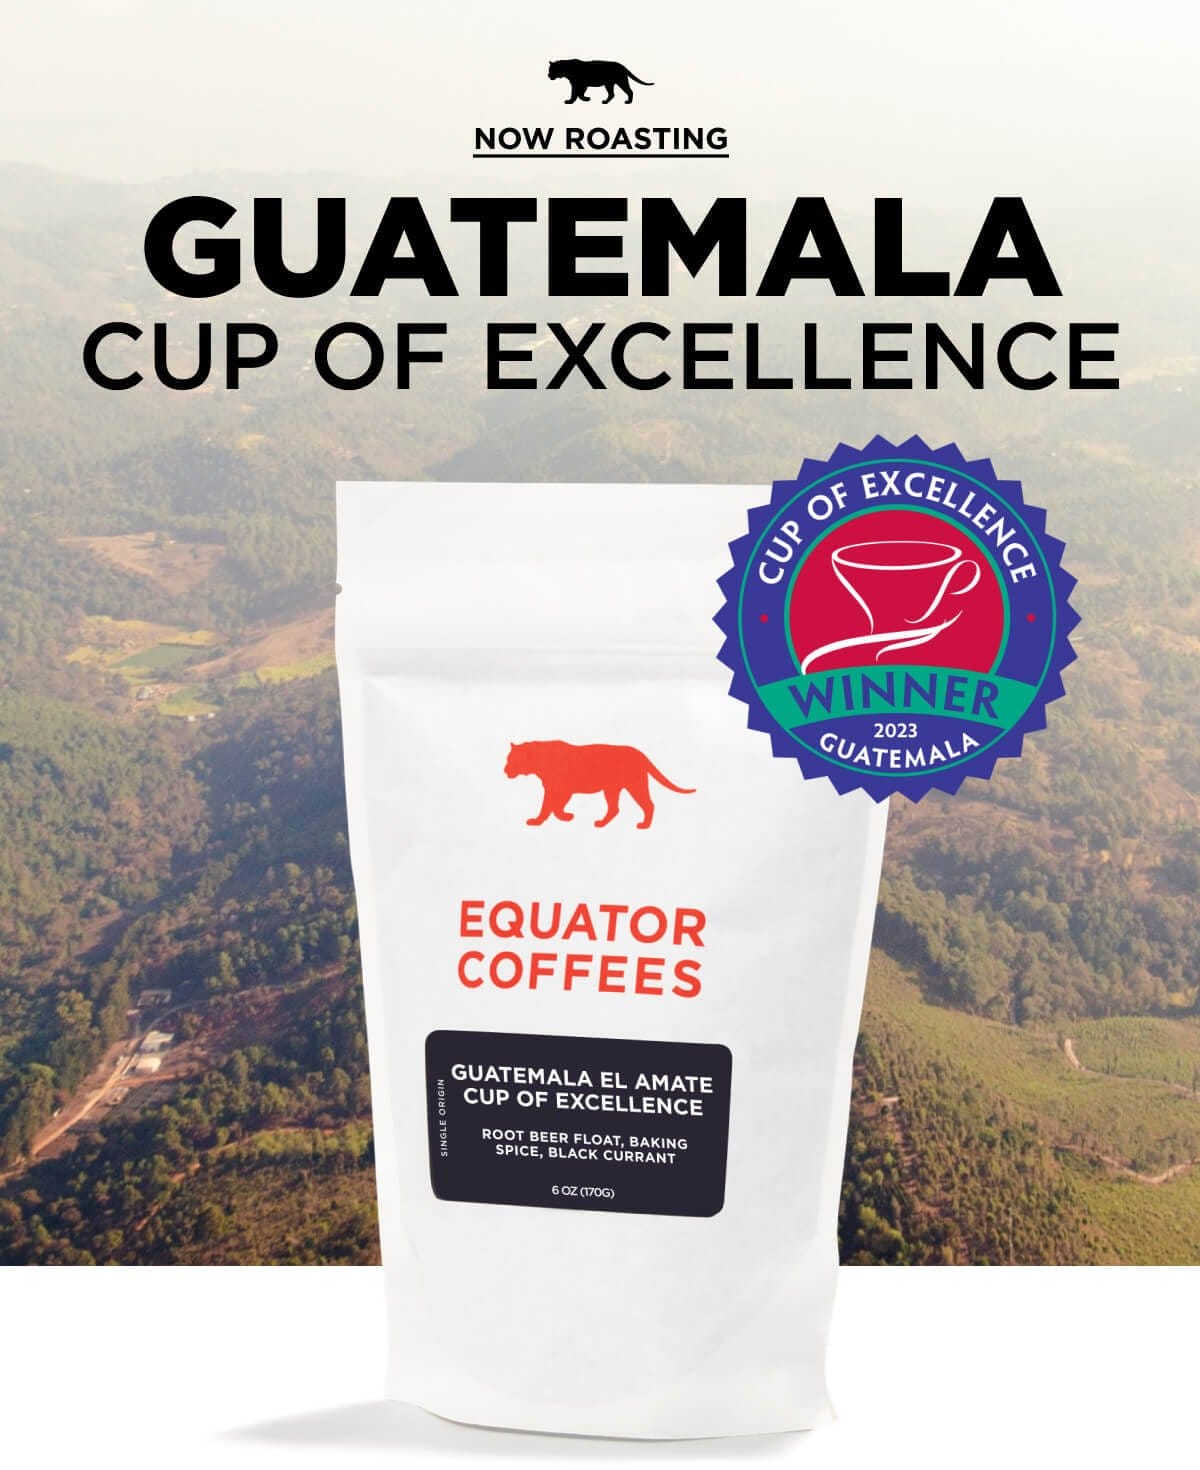 Now Roasting: Guatemala El Amate Cup of Excellence